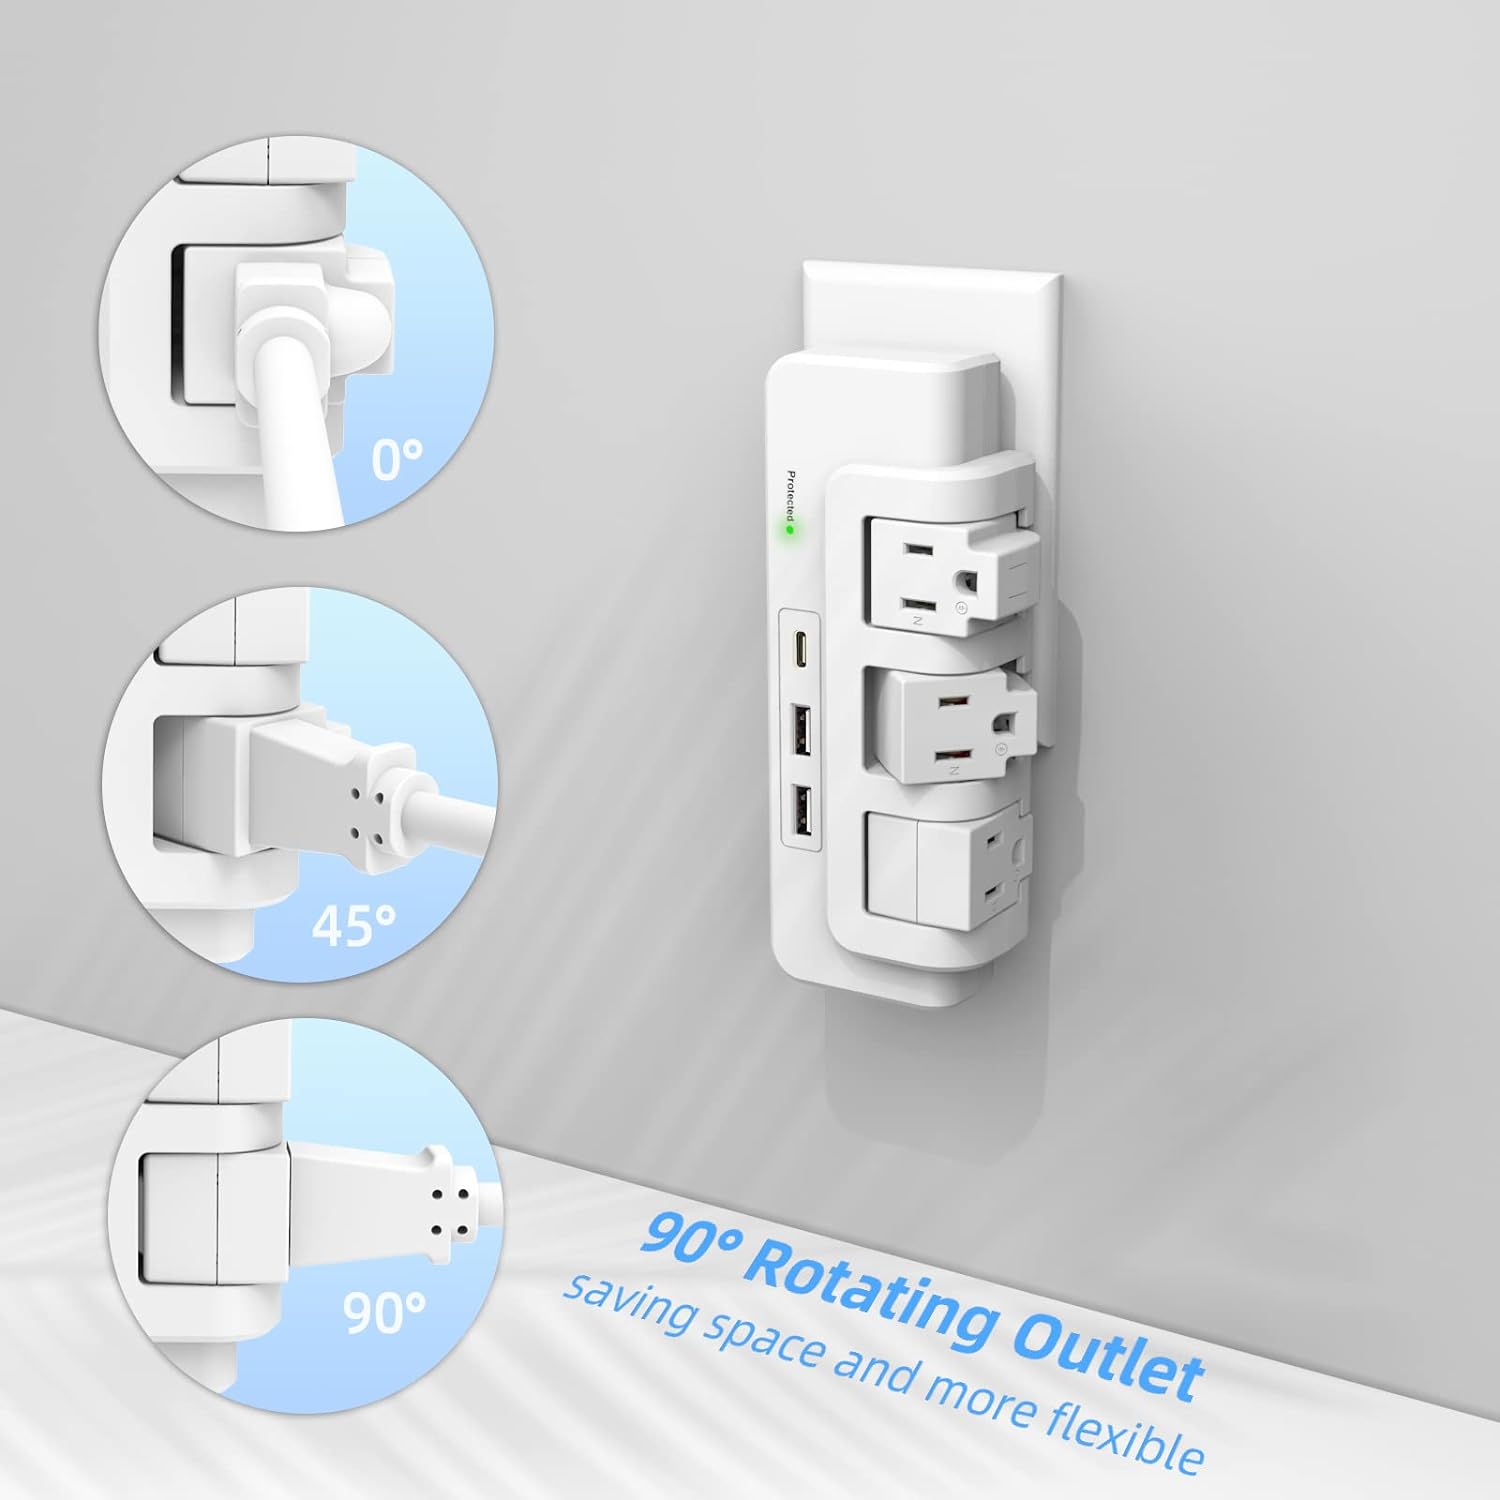 3 Plug Surge Protector With Swivel Outlet $9.99 (reg $25)